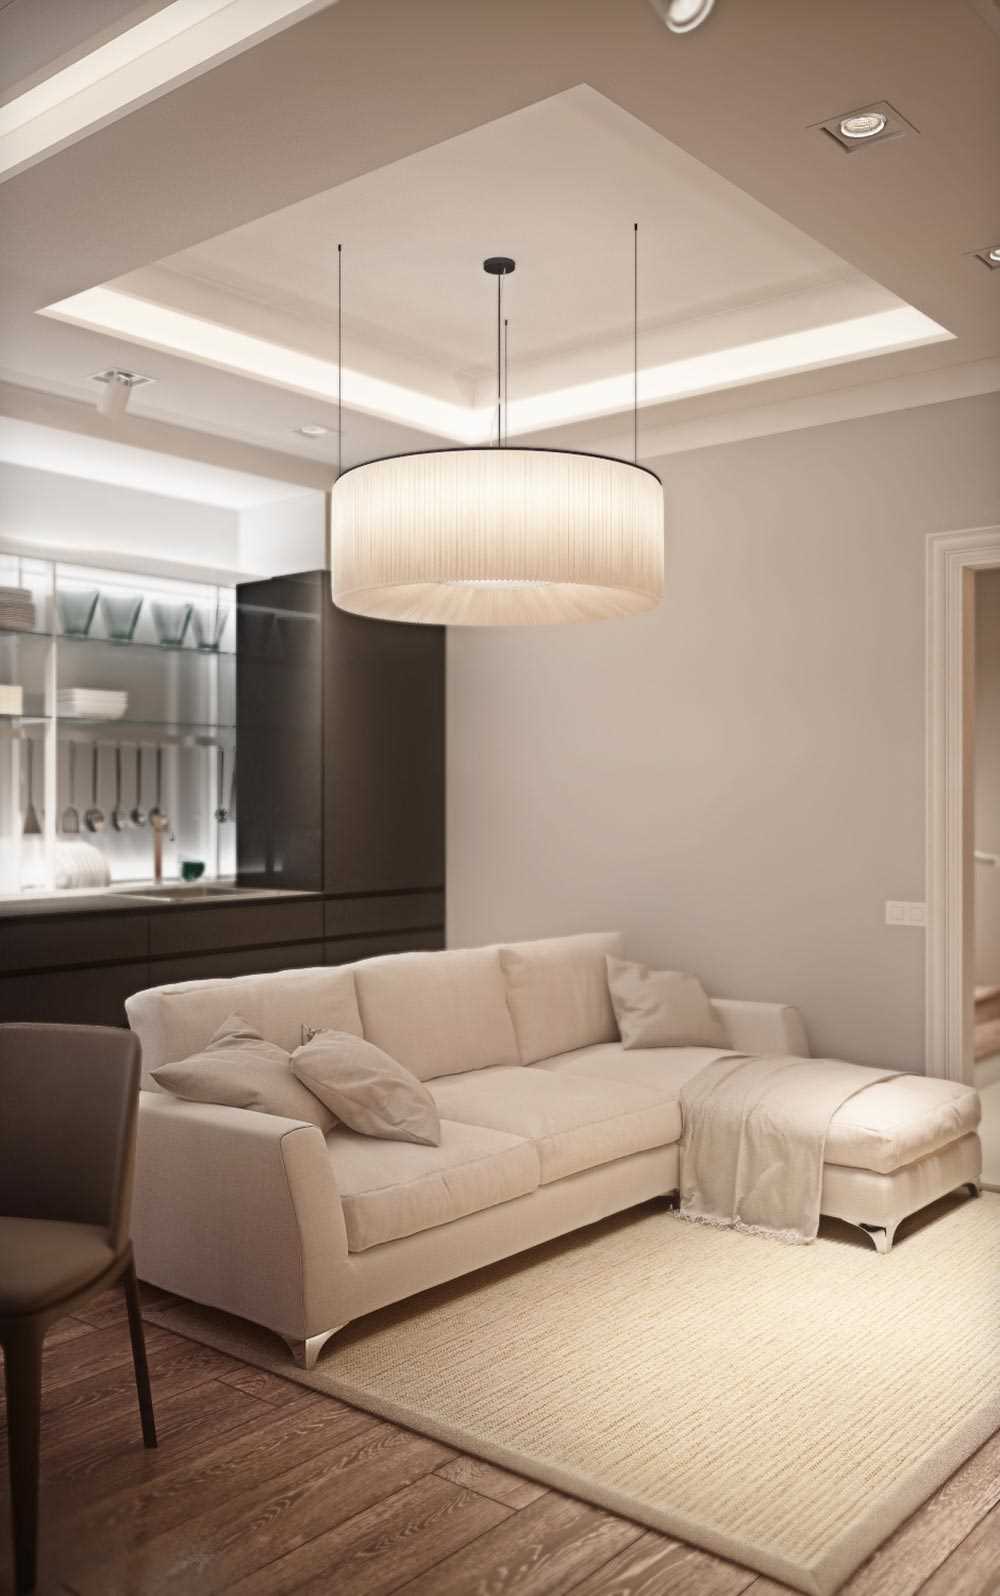 Variant of using light design in a bright house style